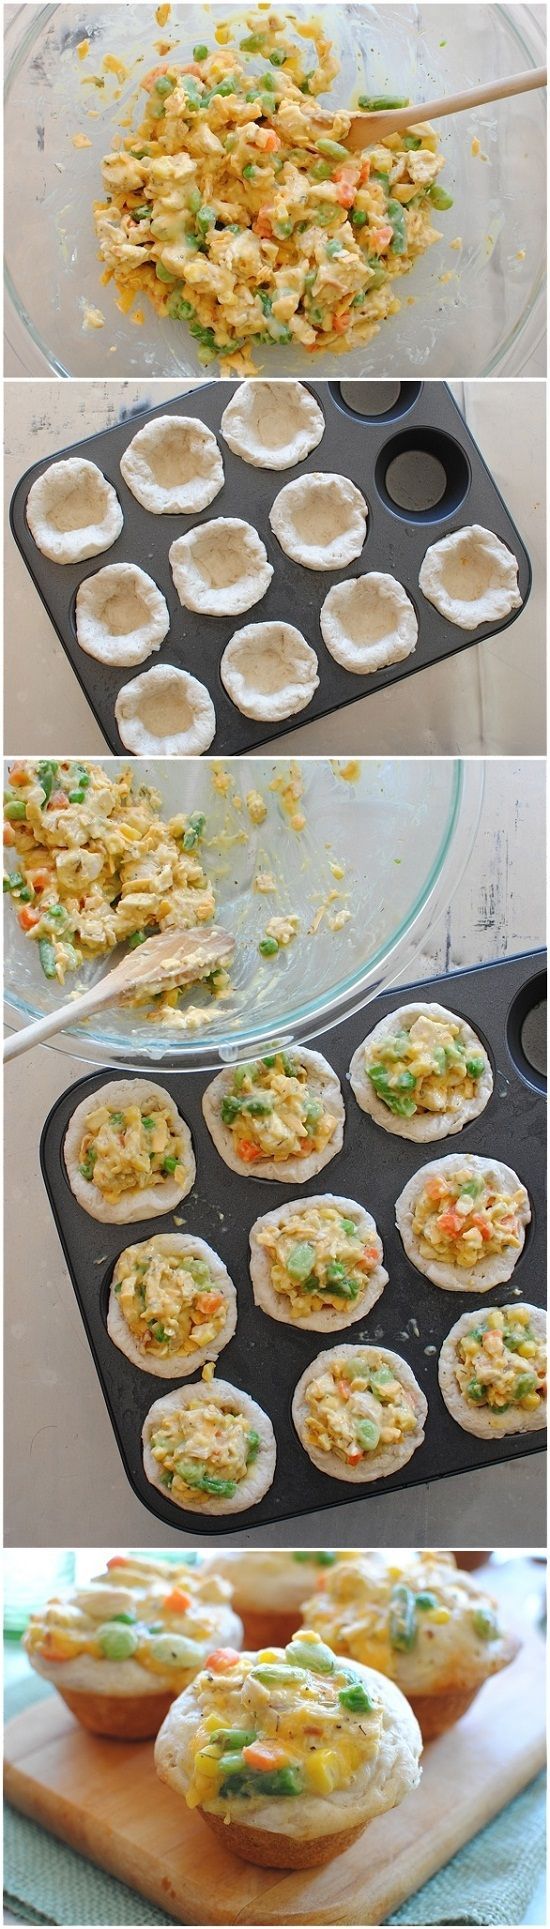 Chicken Pot Pie Cupcakes I would like to use crescent rolls or the flakey biscui